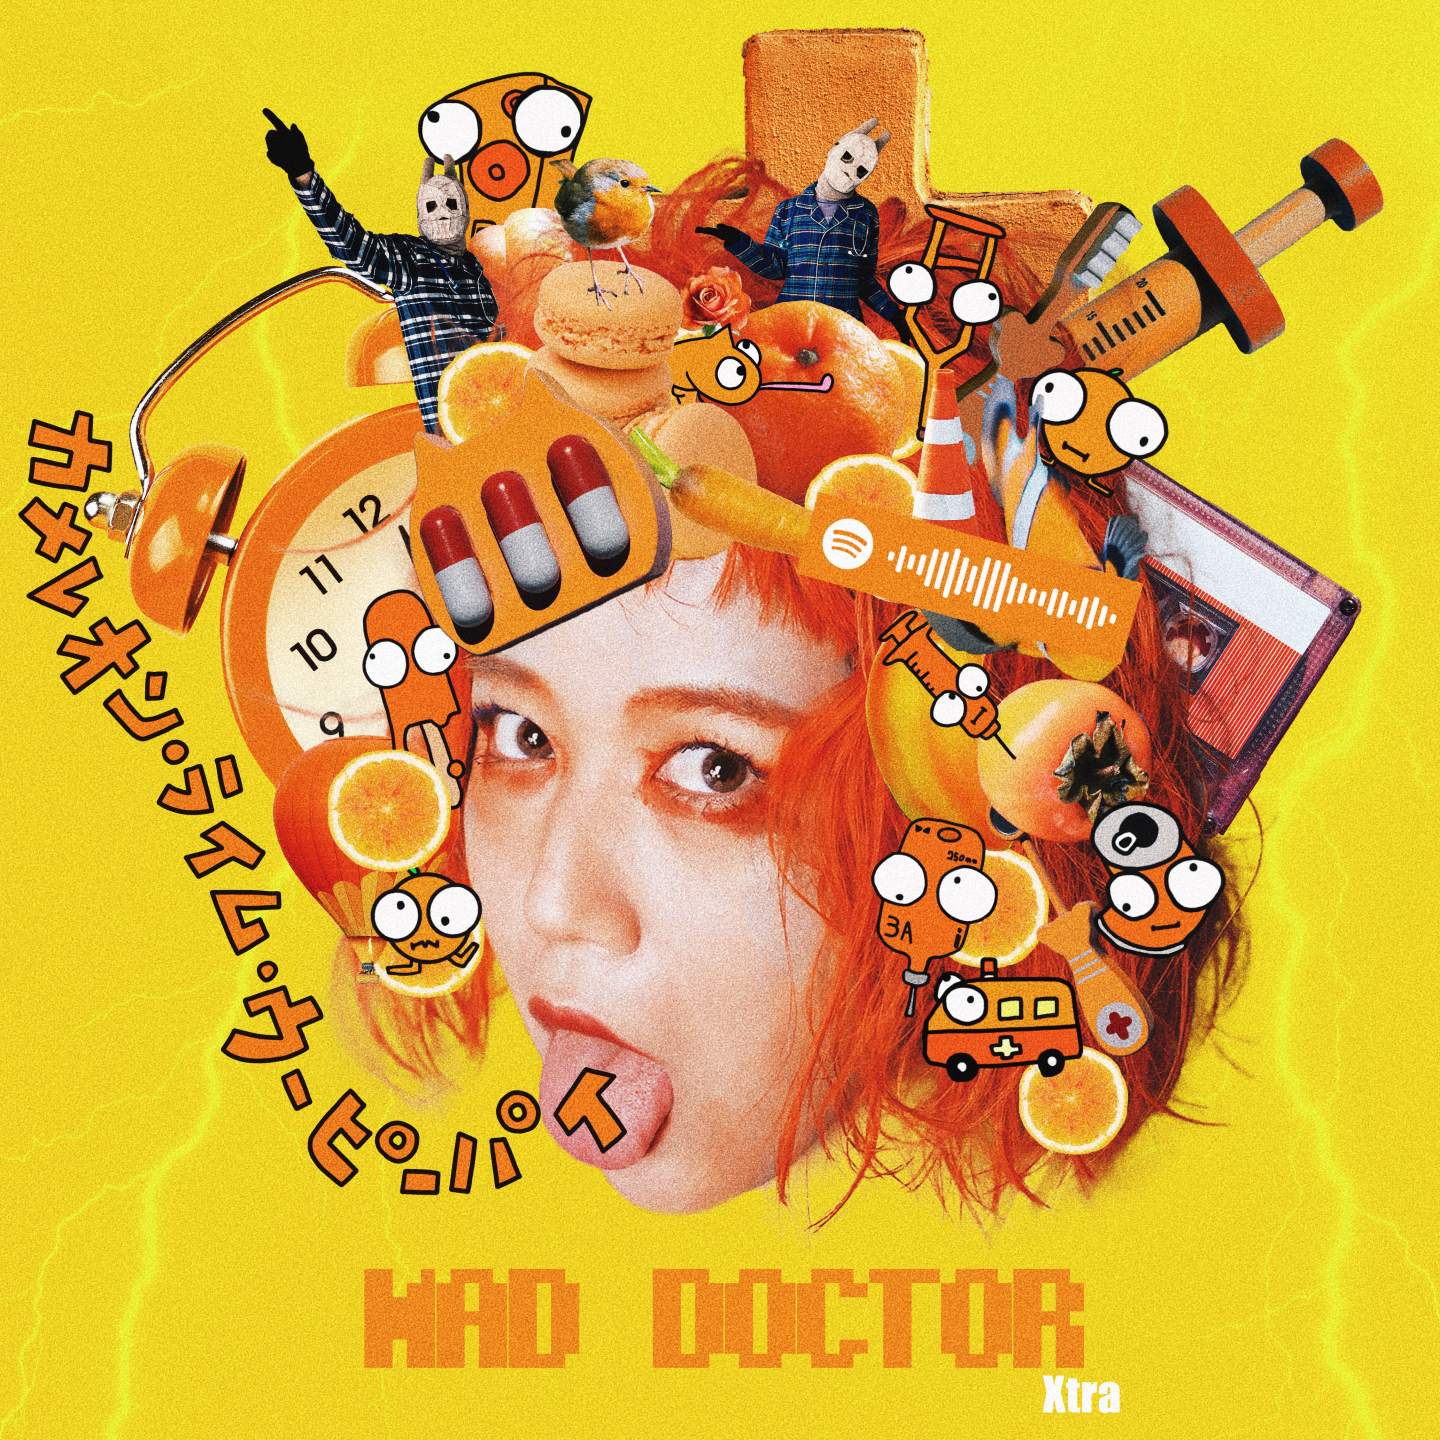 MAD DOCTOR Xtra